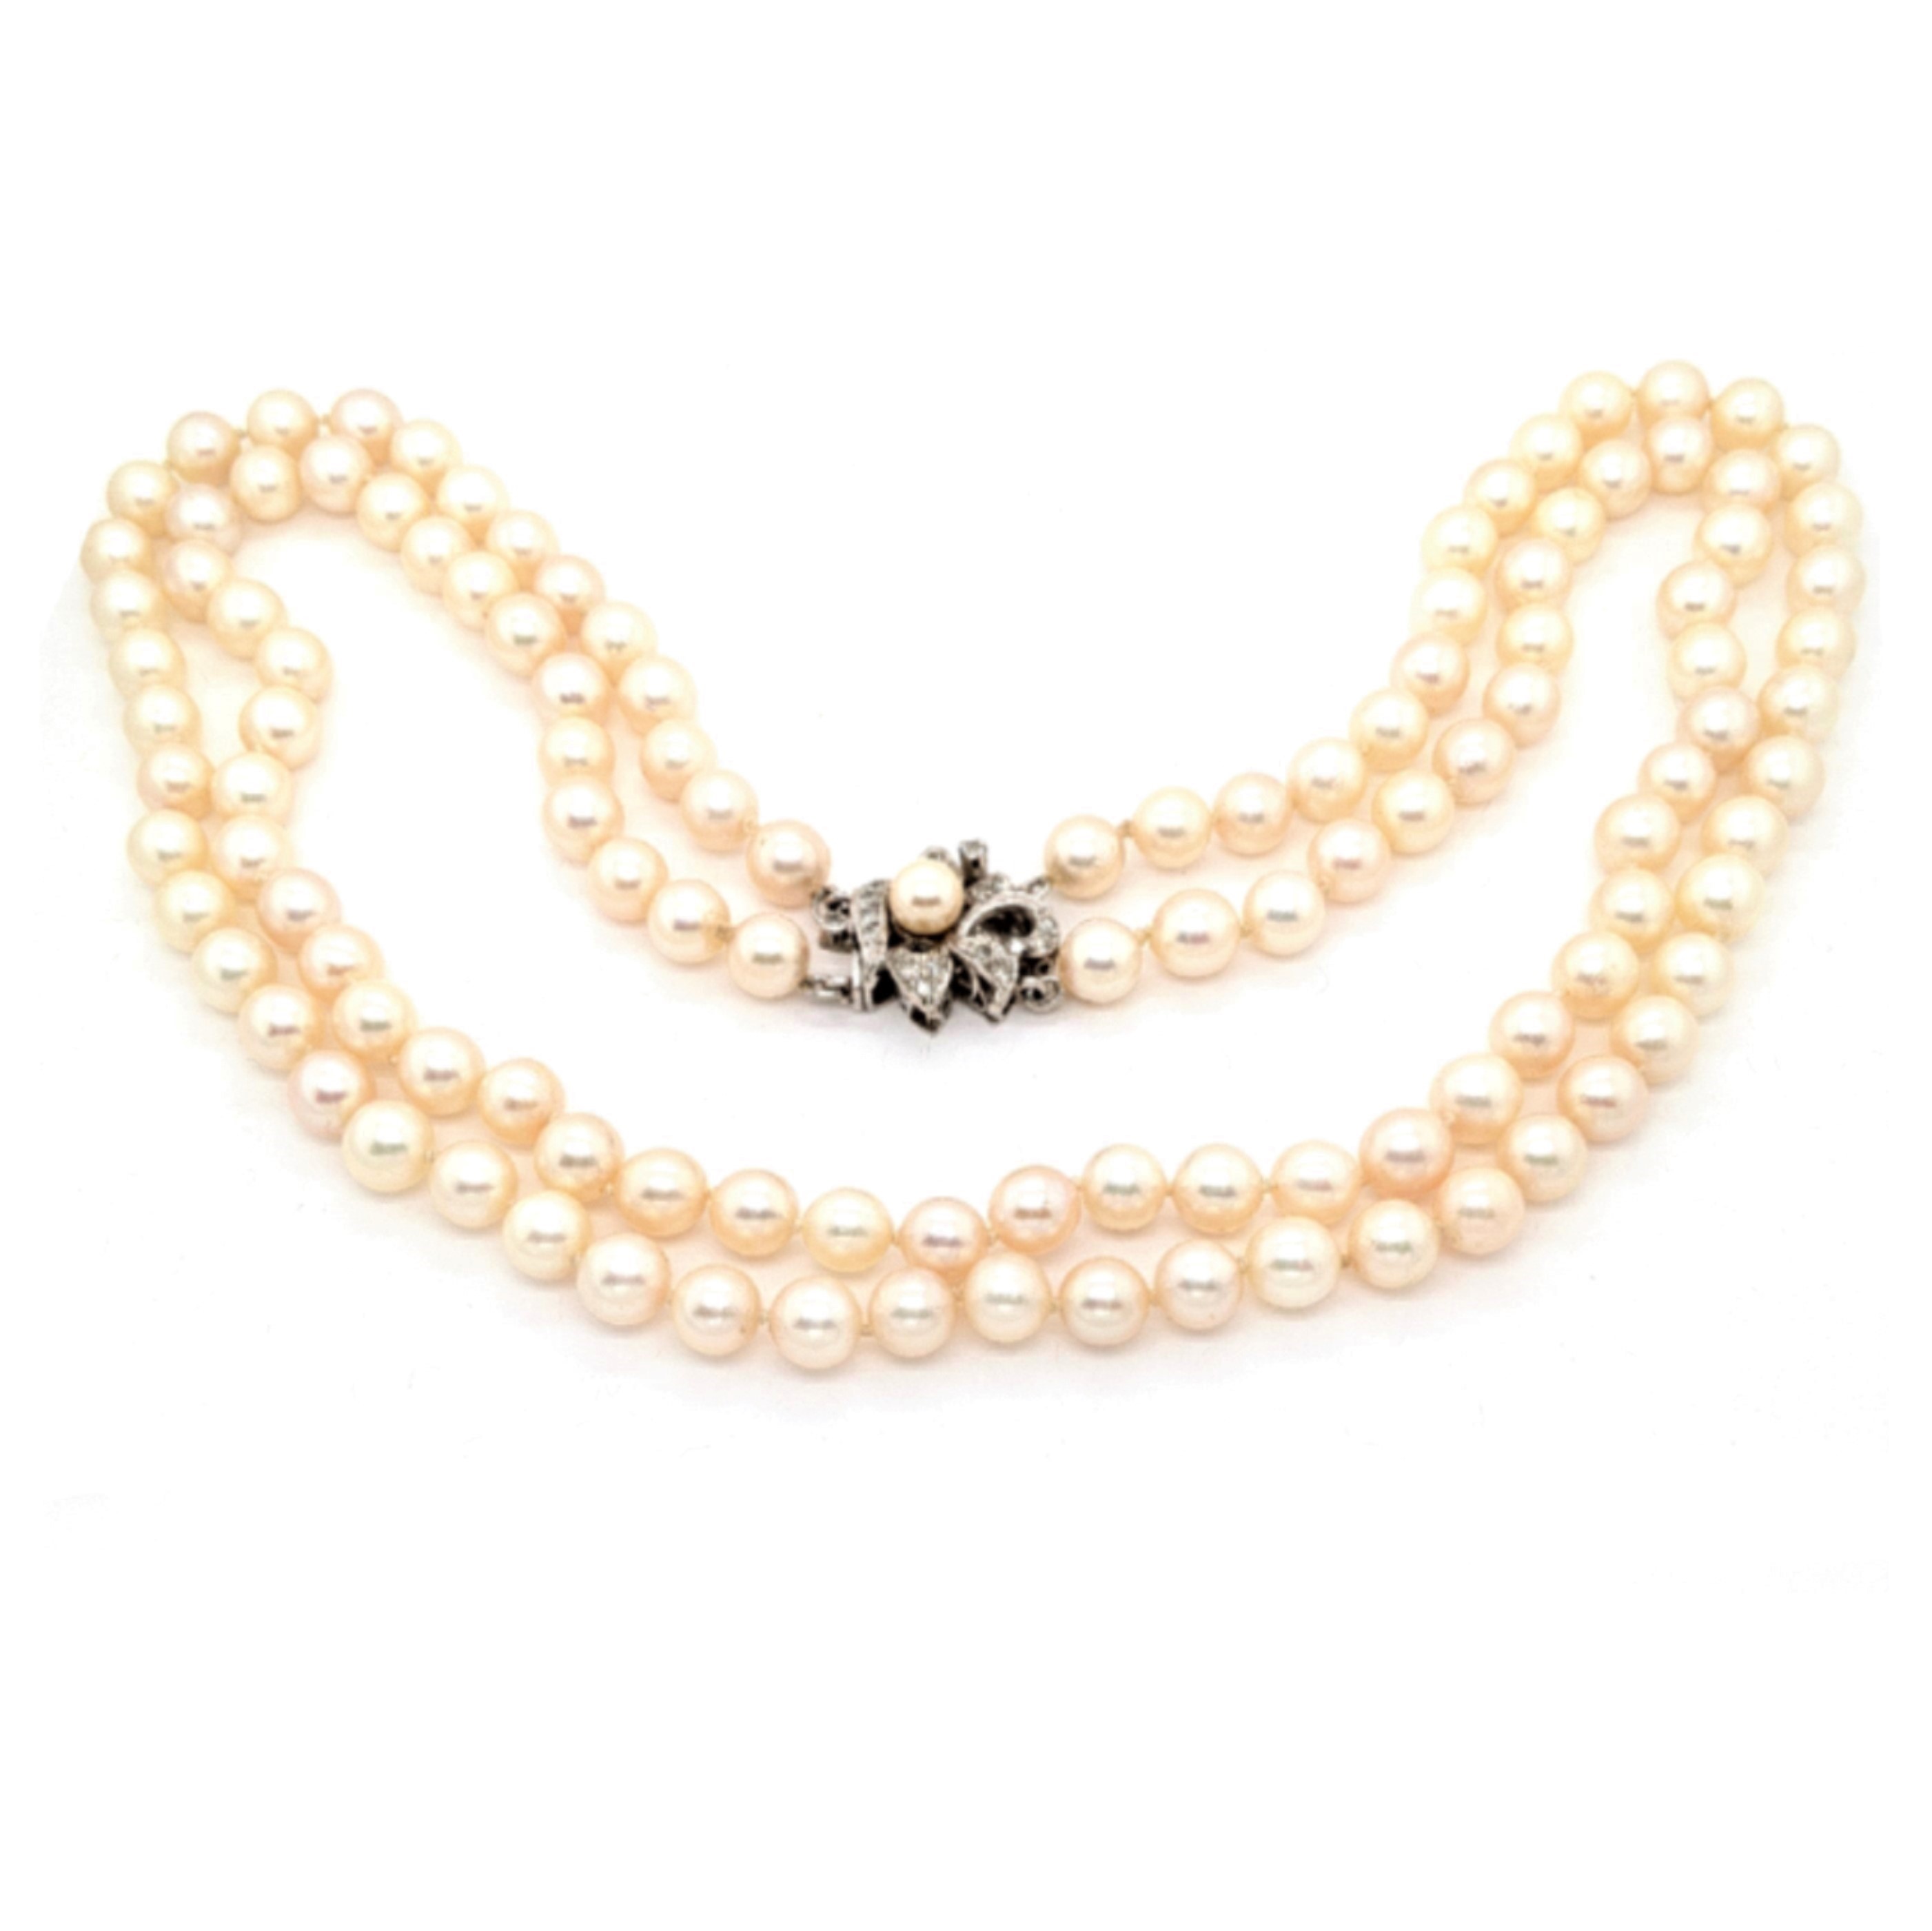 Doublle Strand Pearl Necklace